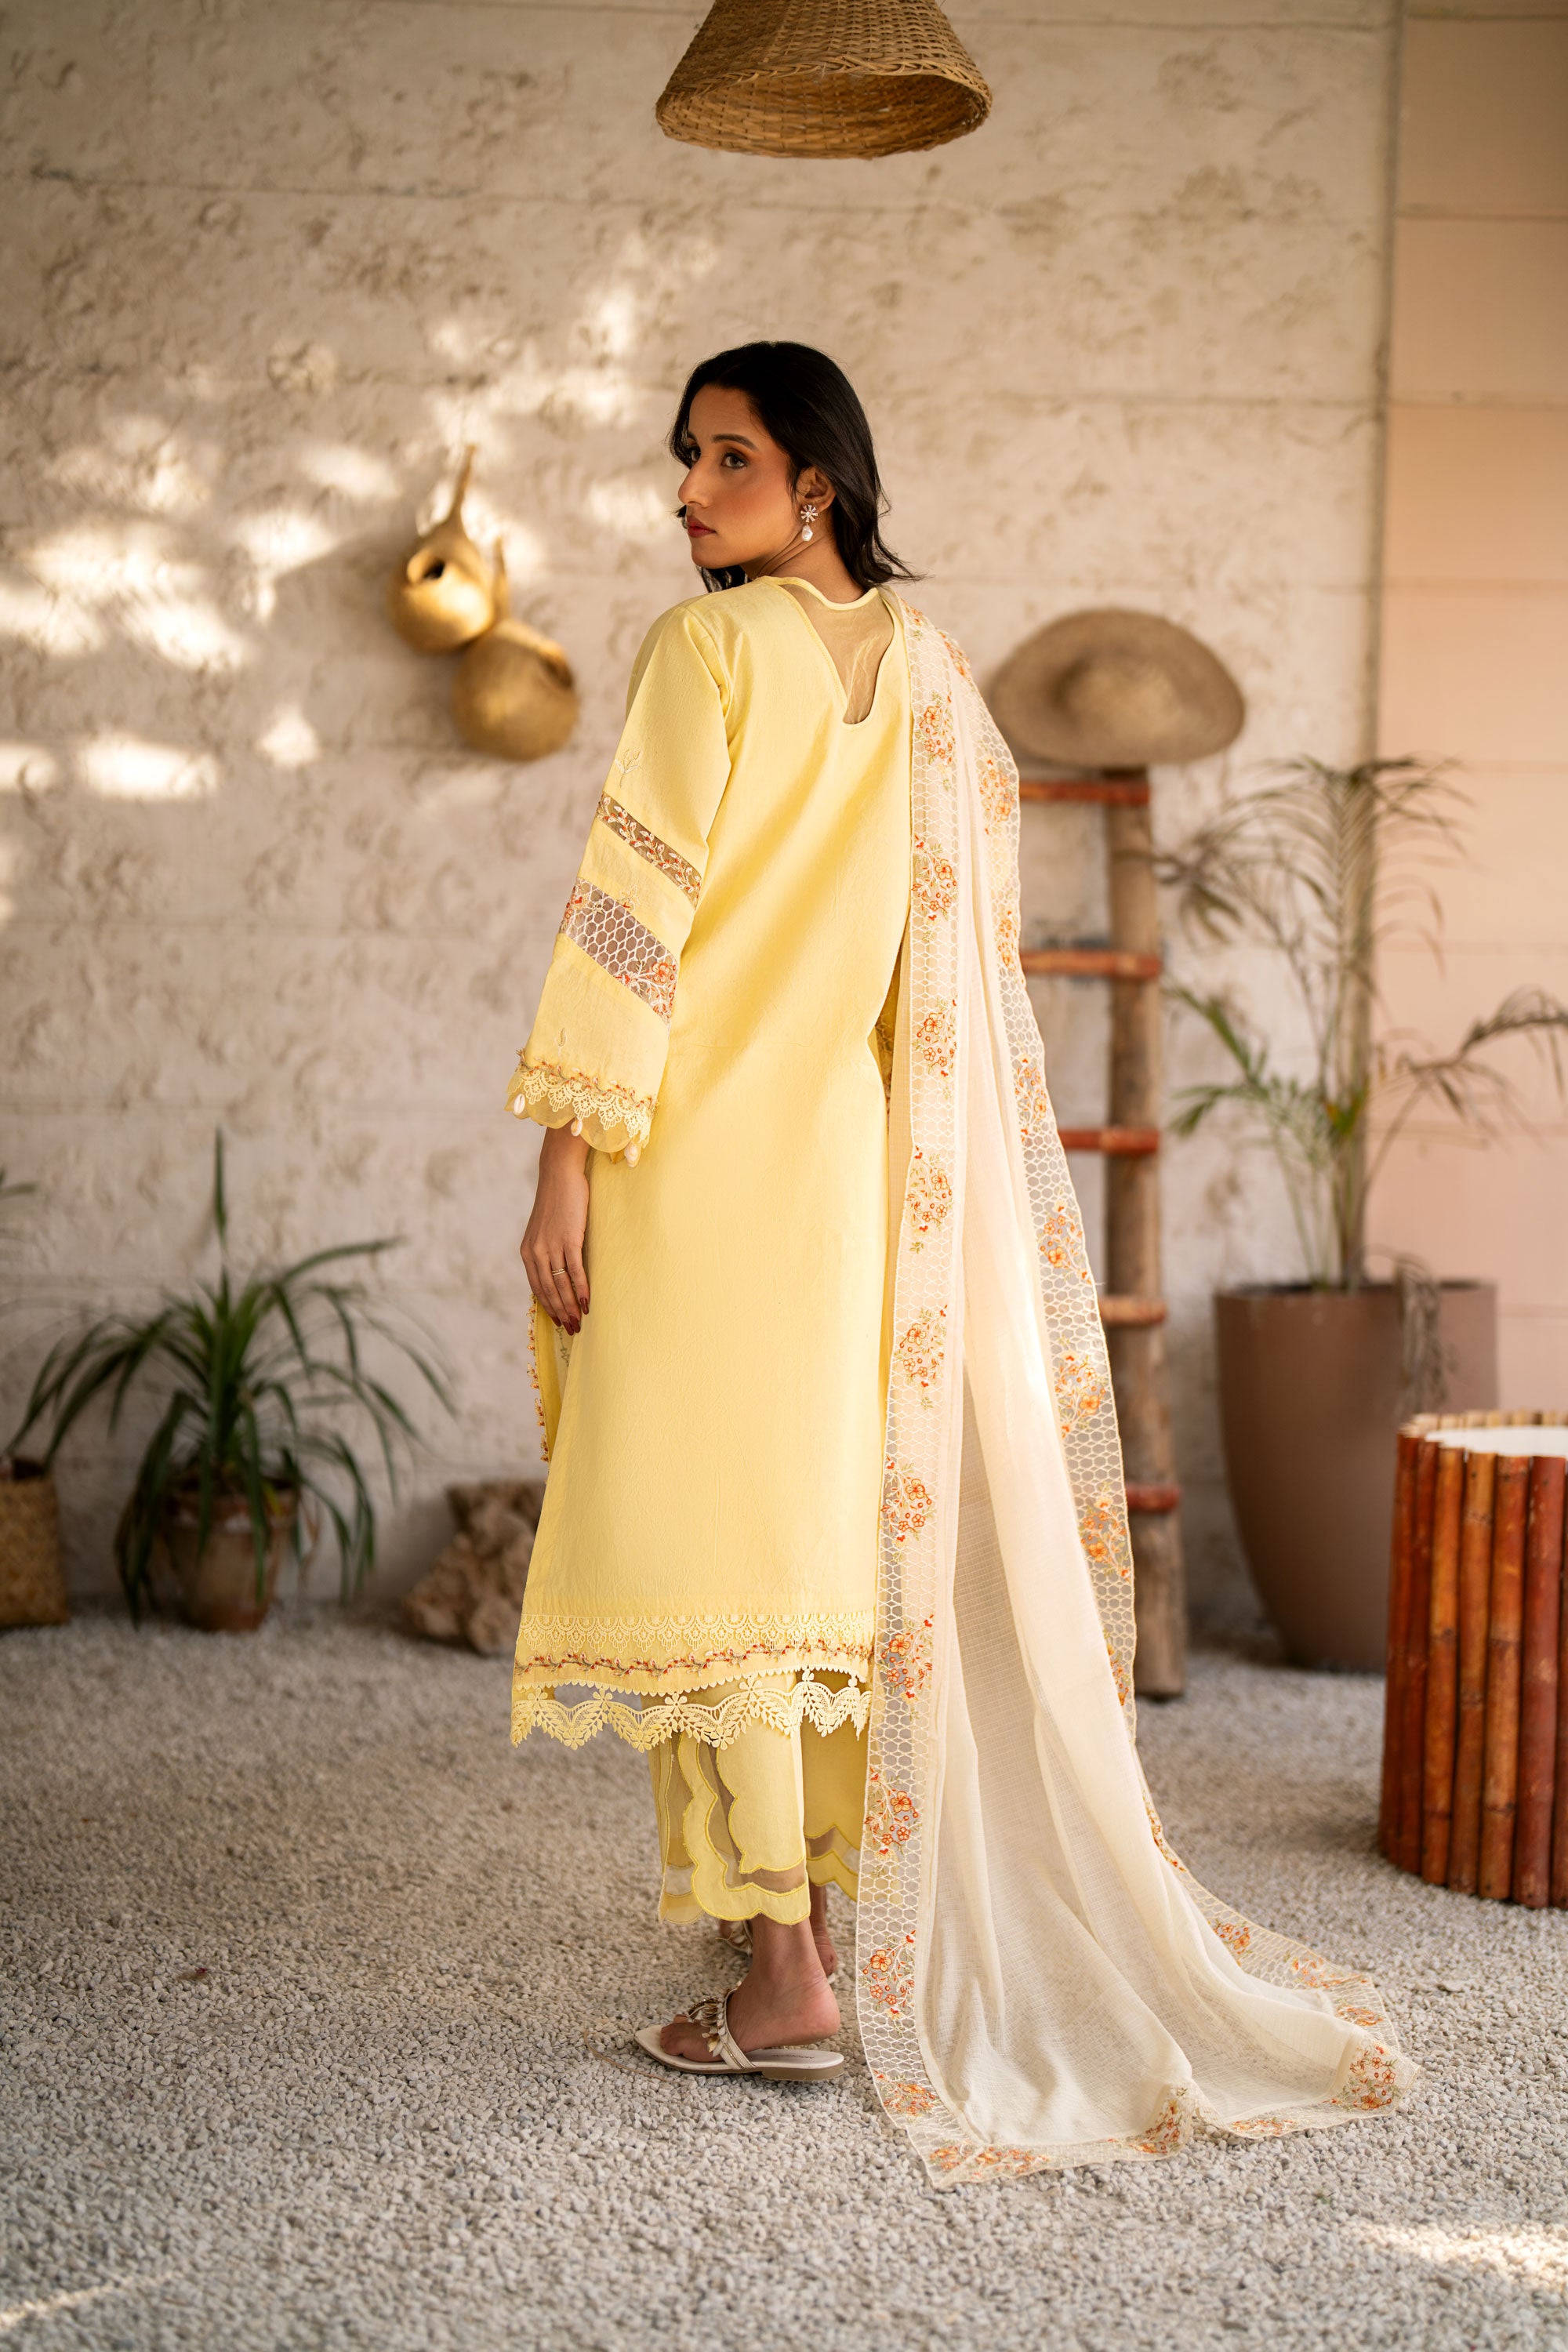 Lemon Delight 3 Piece Embroidered Lawn Stitched Suit. Order now